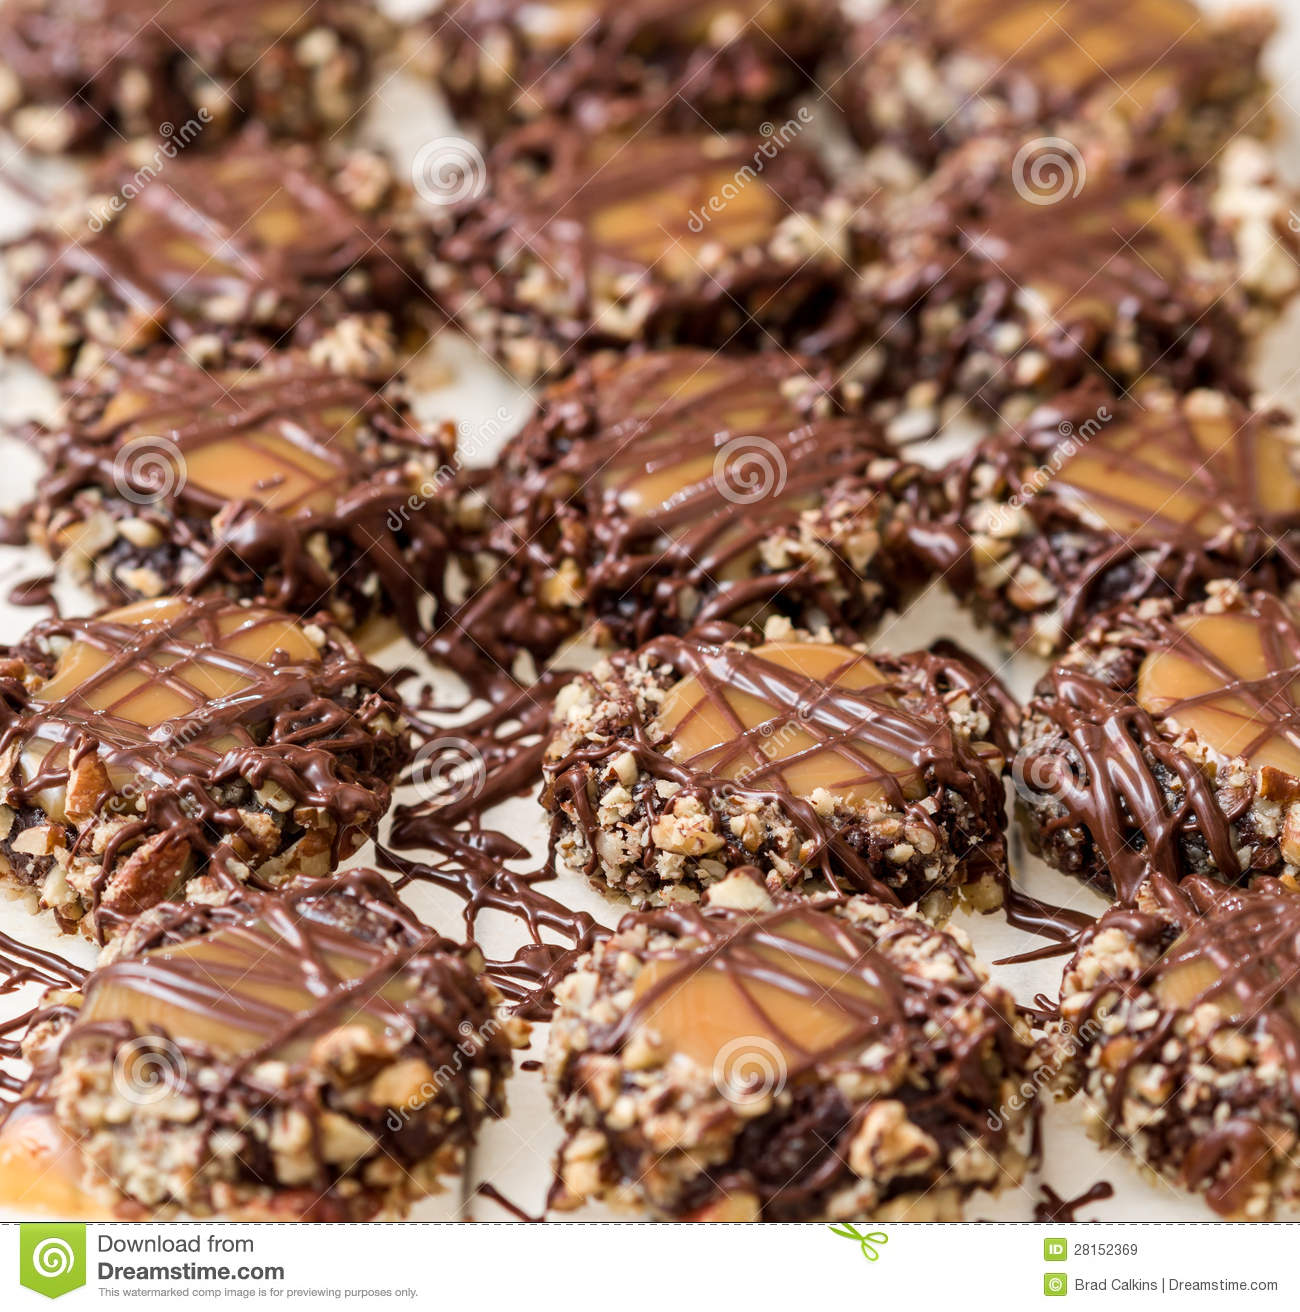 Pecan Caramel And Chocolate Royalty Free Stock Images   Image